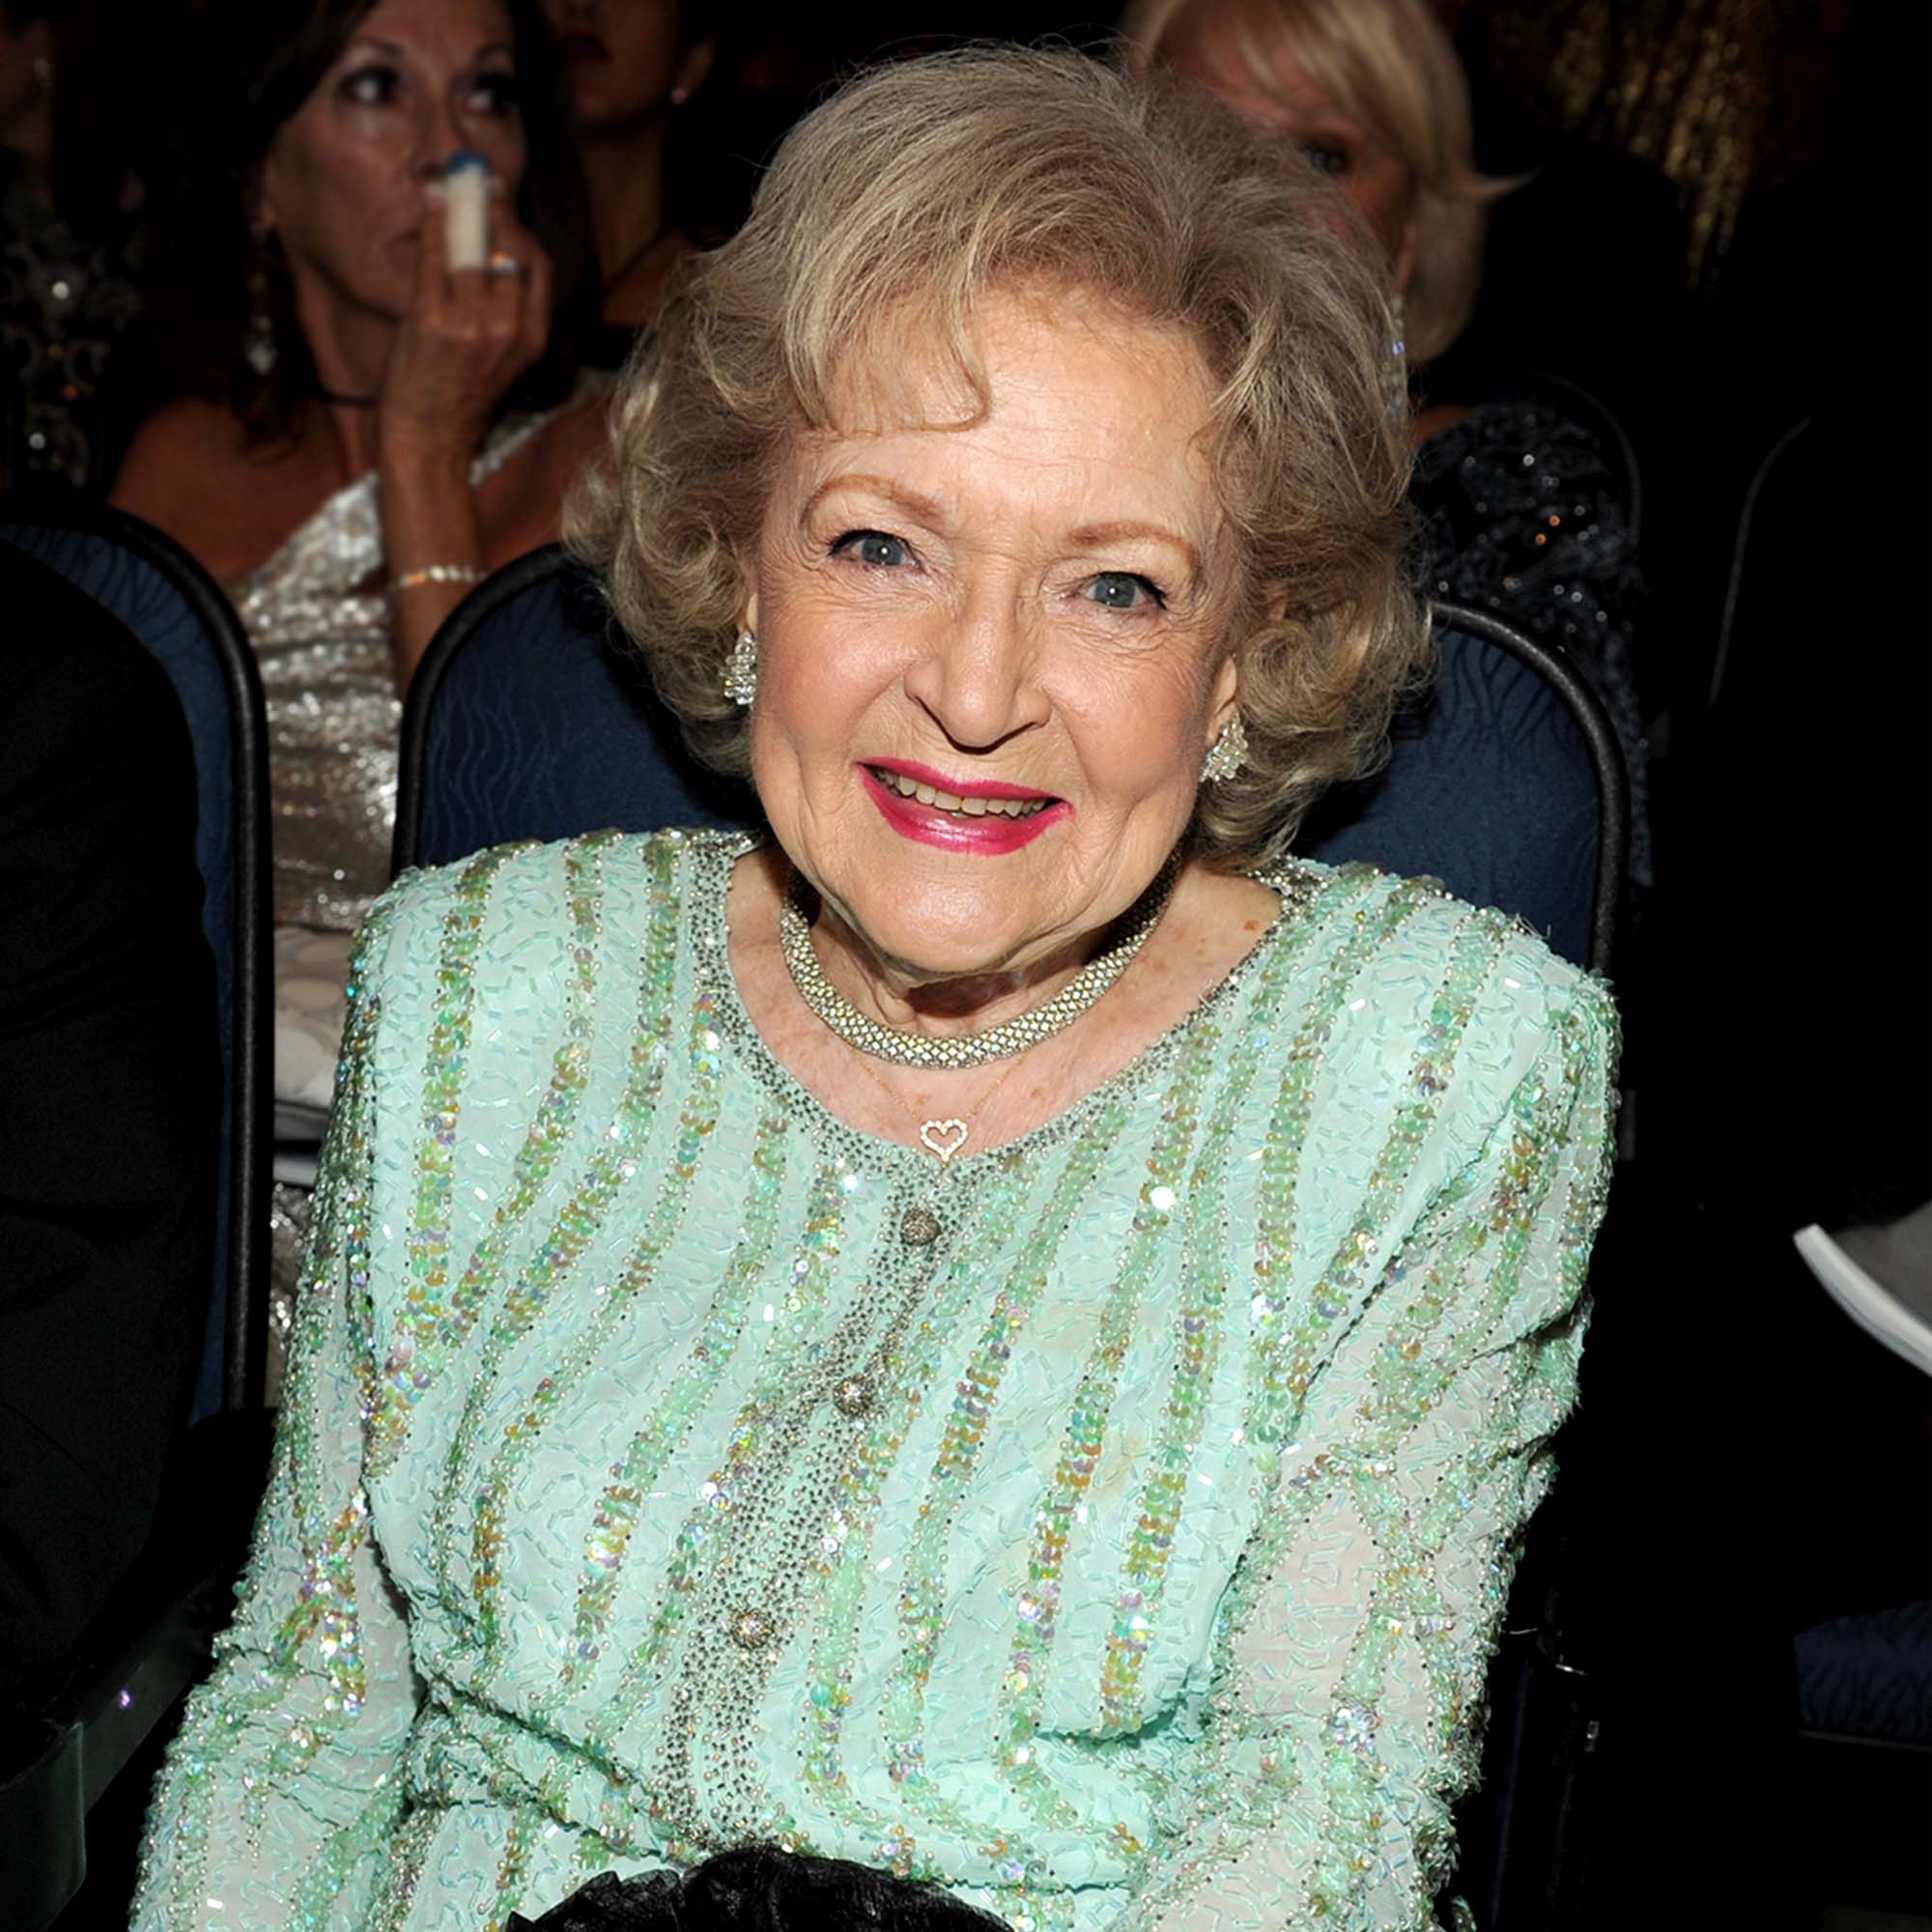 Betty White Had Sweet Last Words Before Her Death Age 99 002